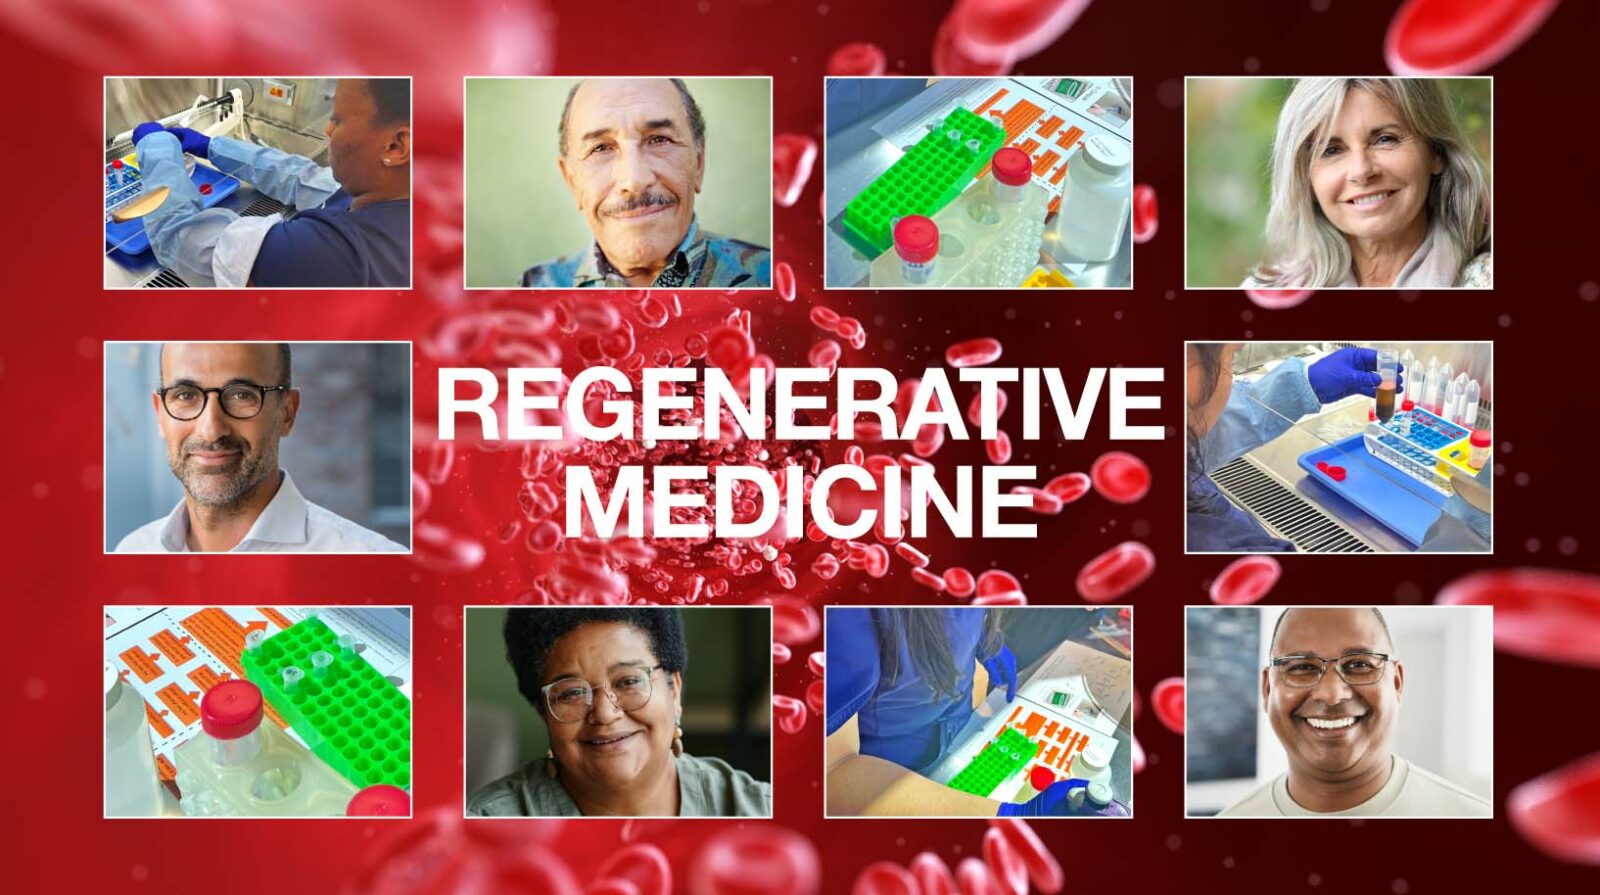 Regenerative medicine photo with people and background of blood cells. Apico Delaware pain management doctors